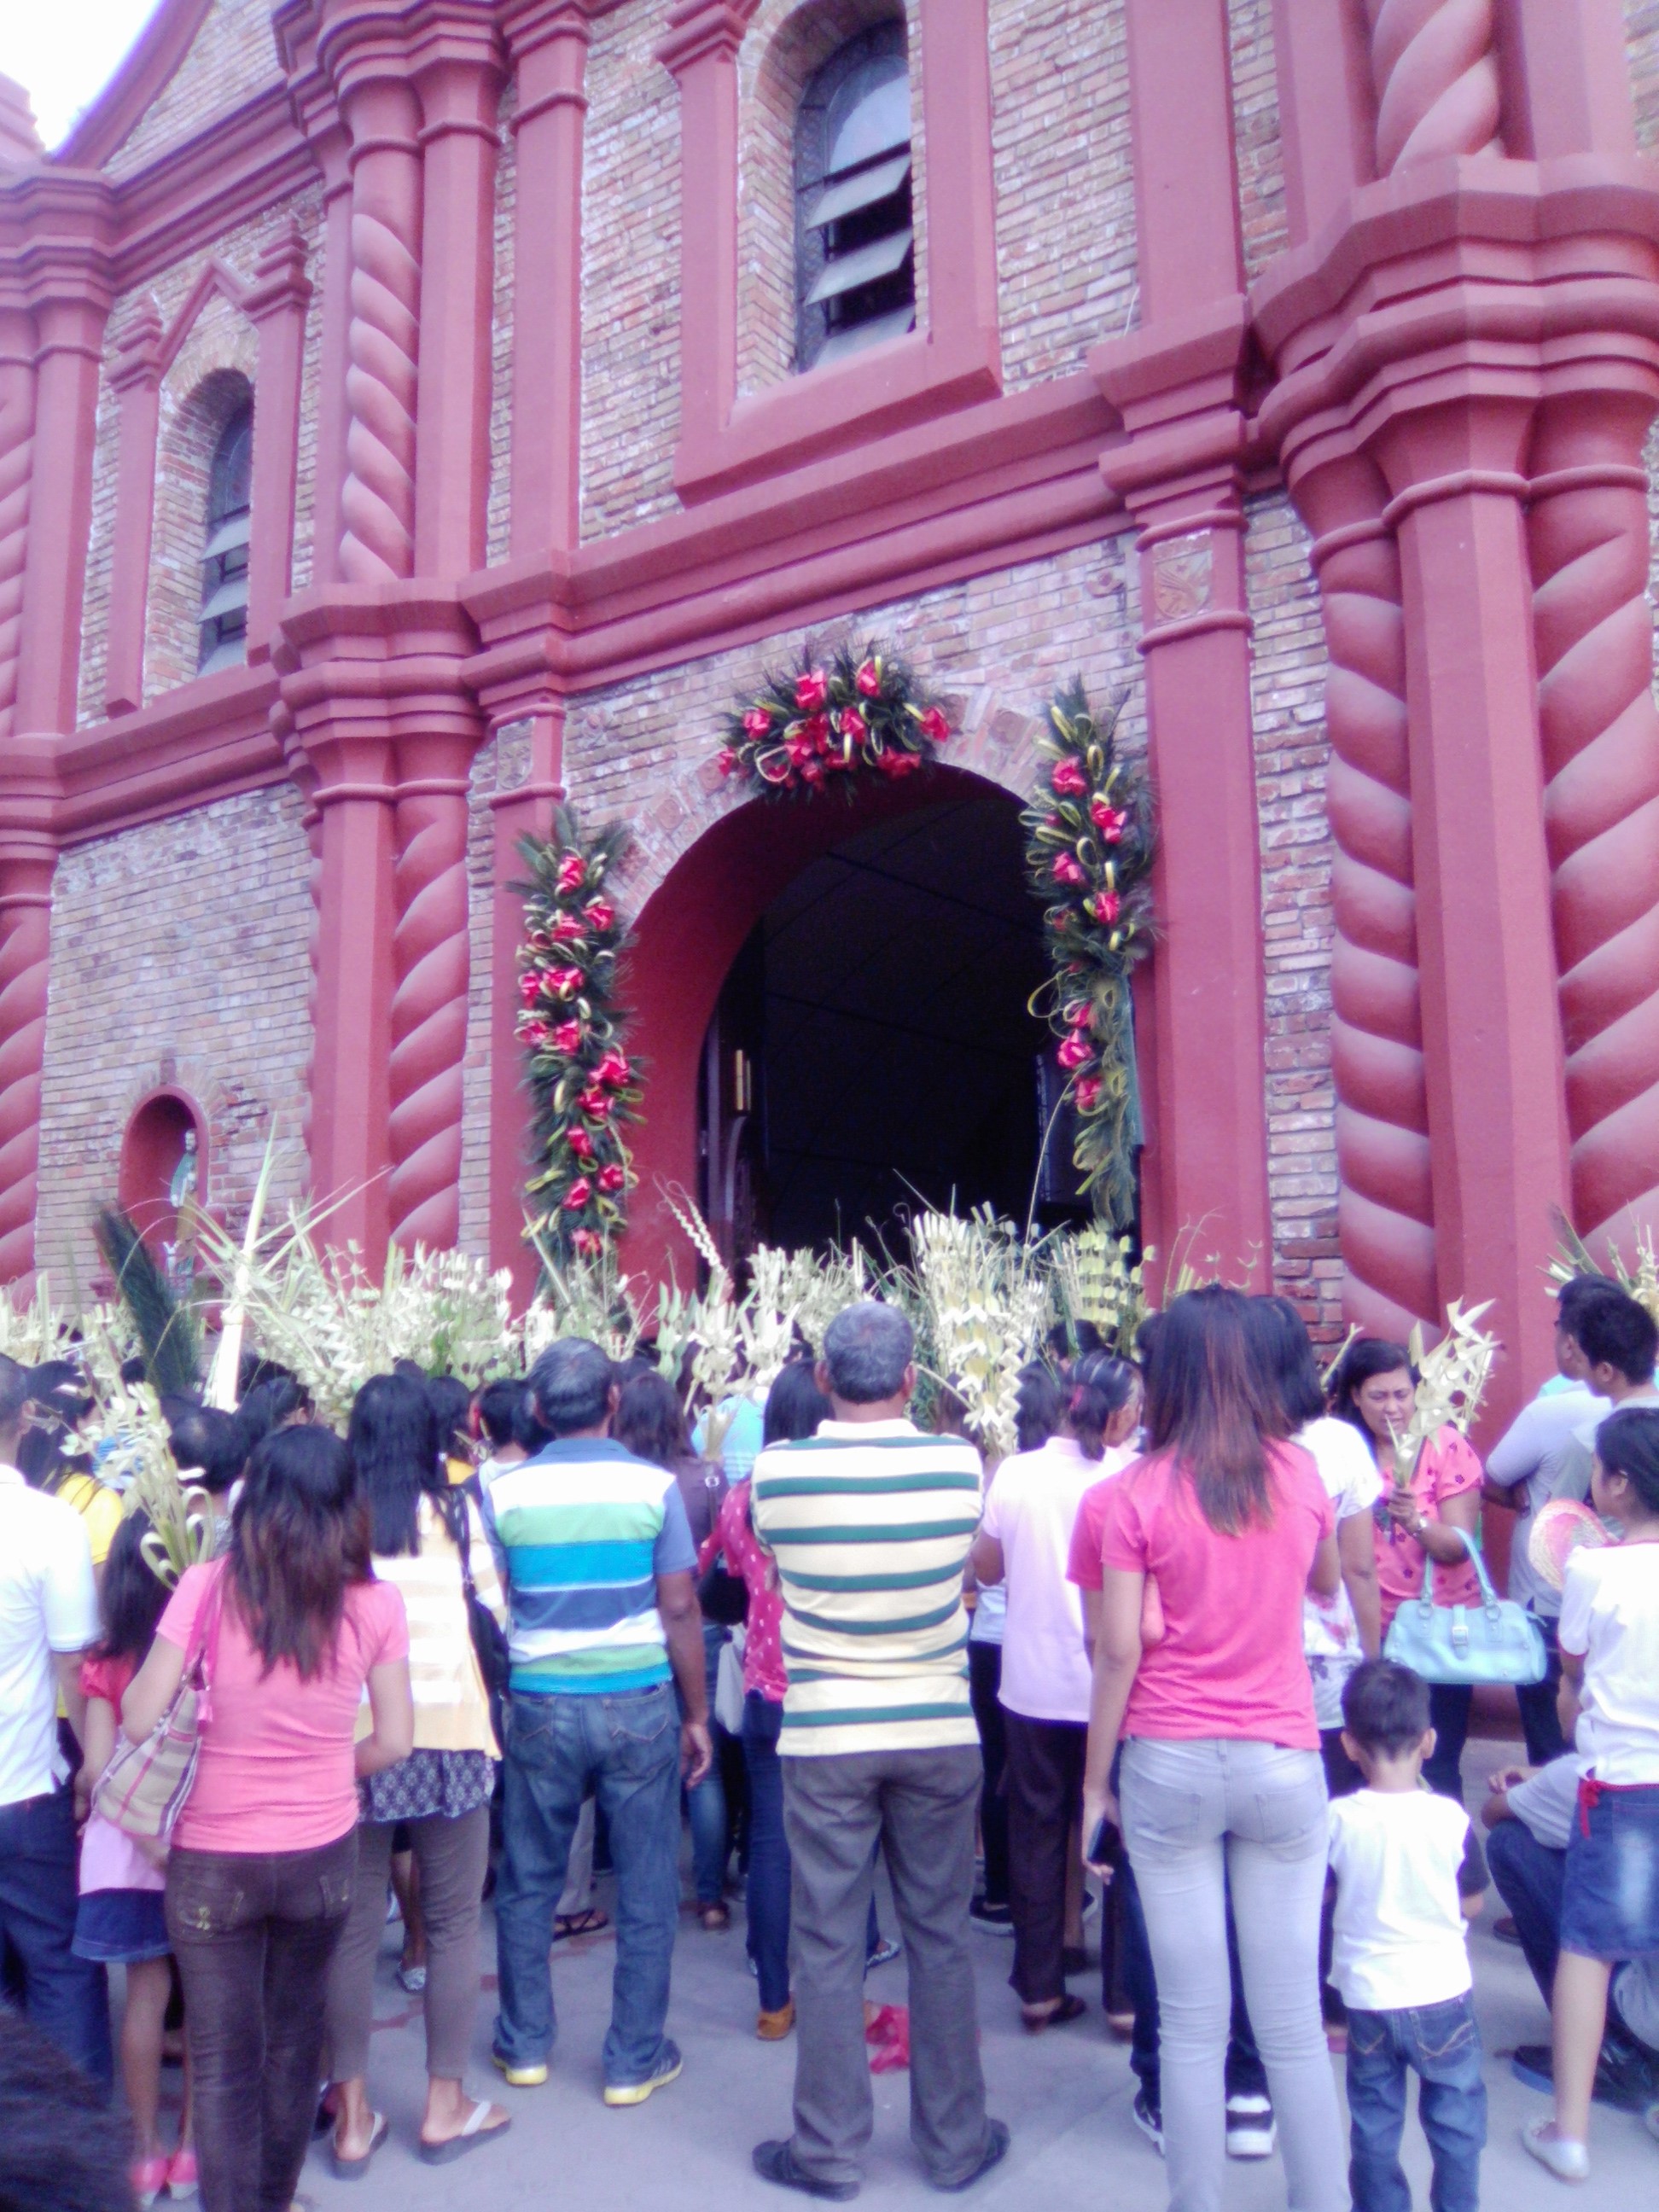 the entrance of our Cathedral